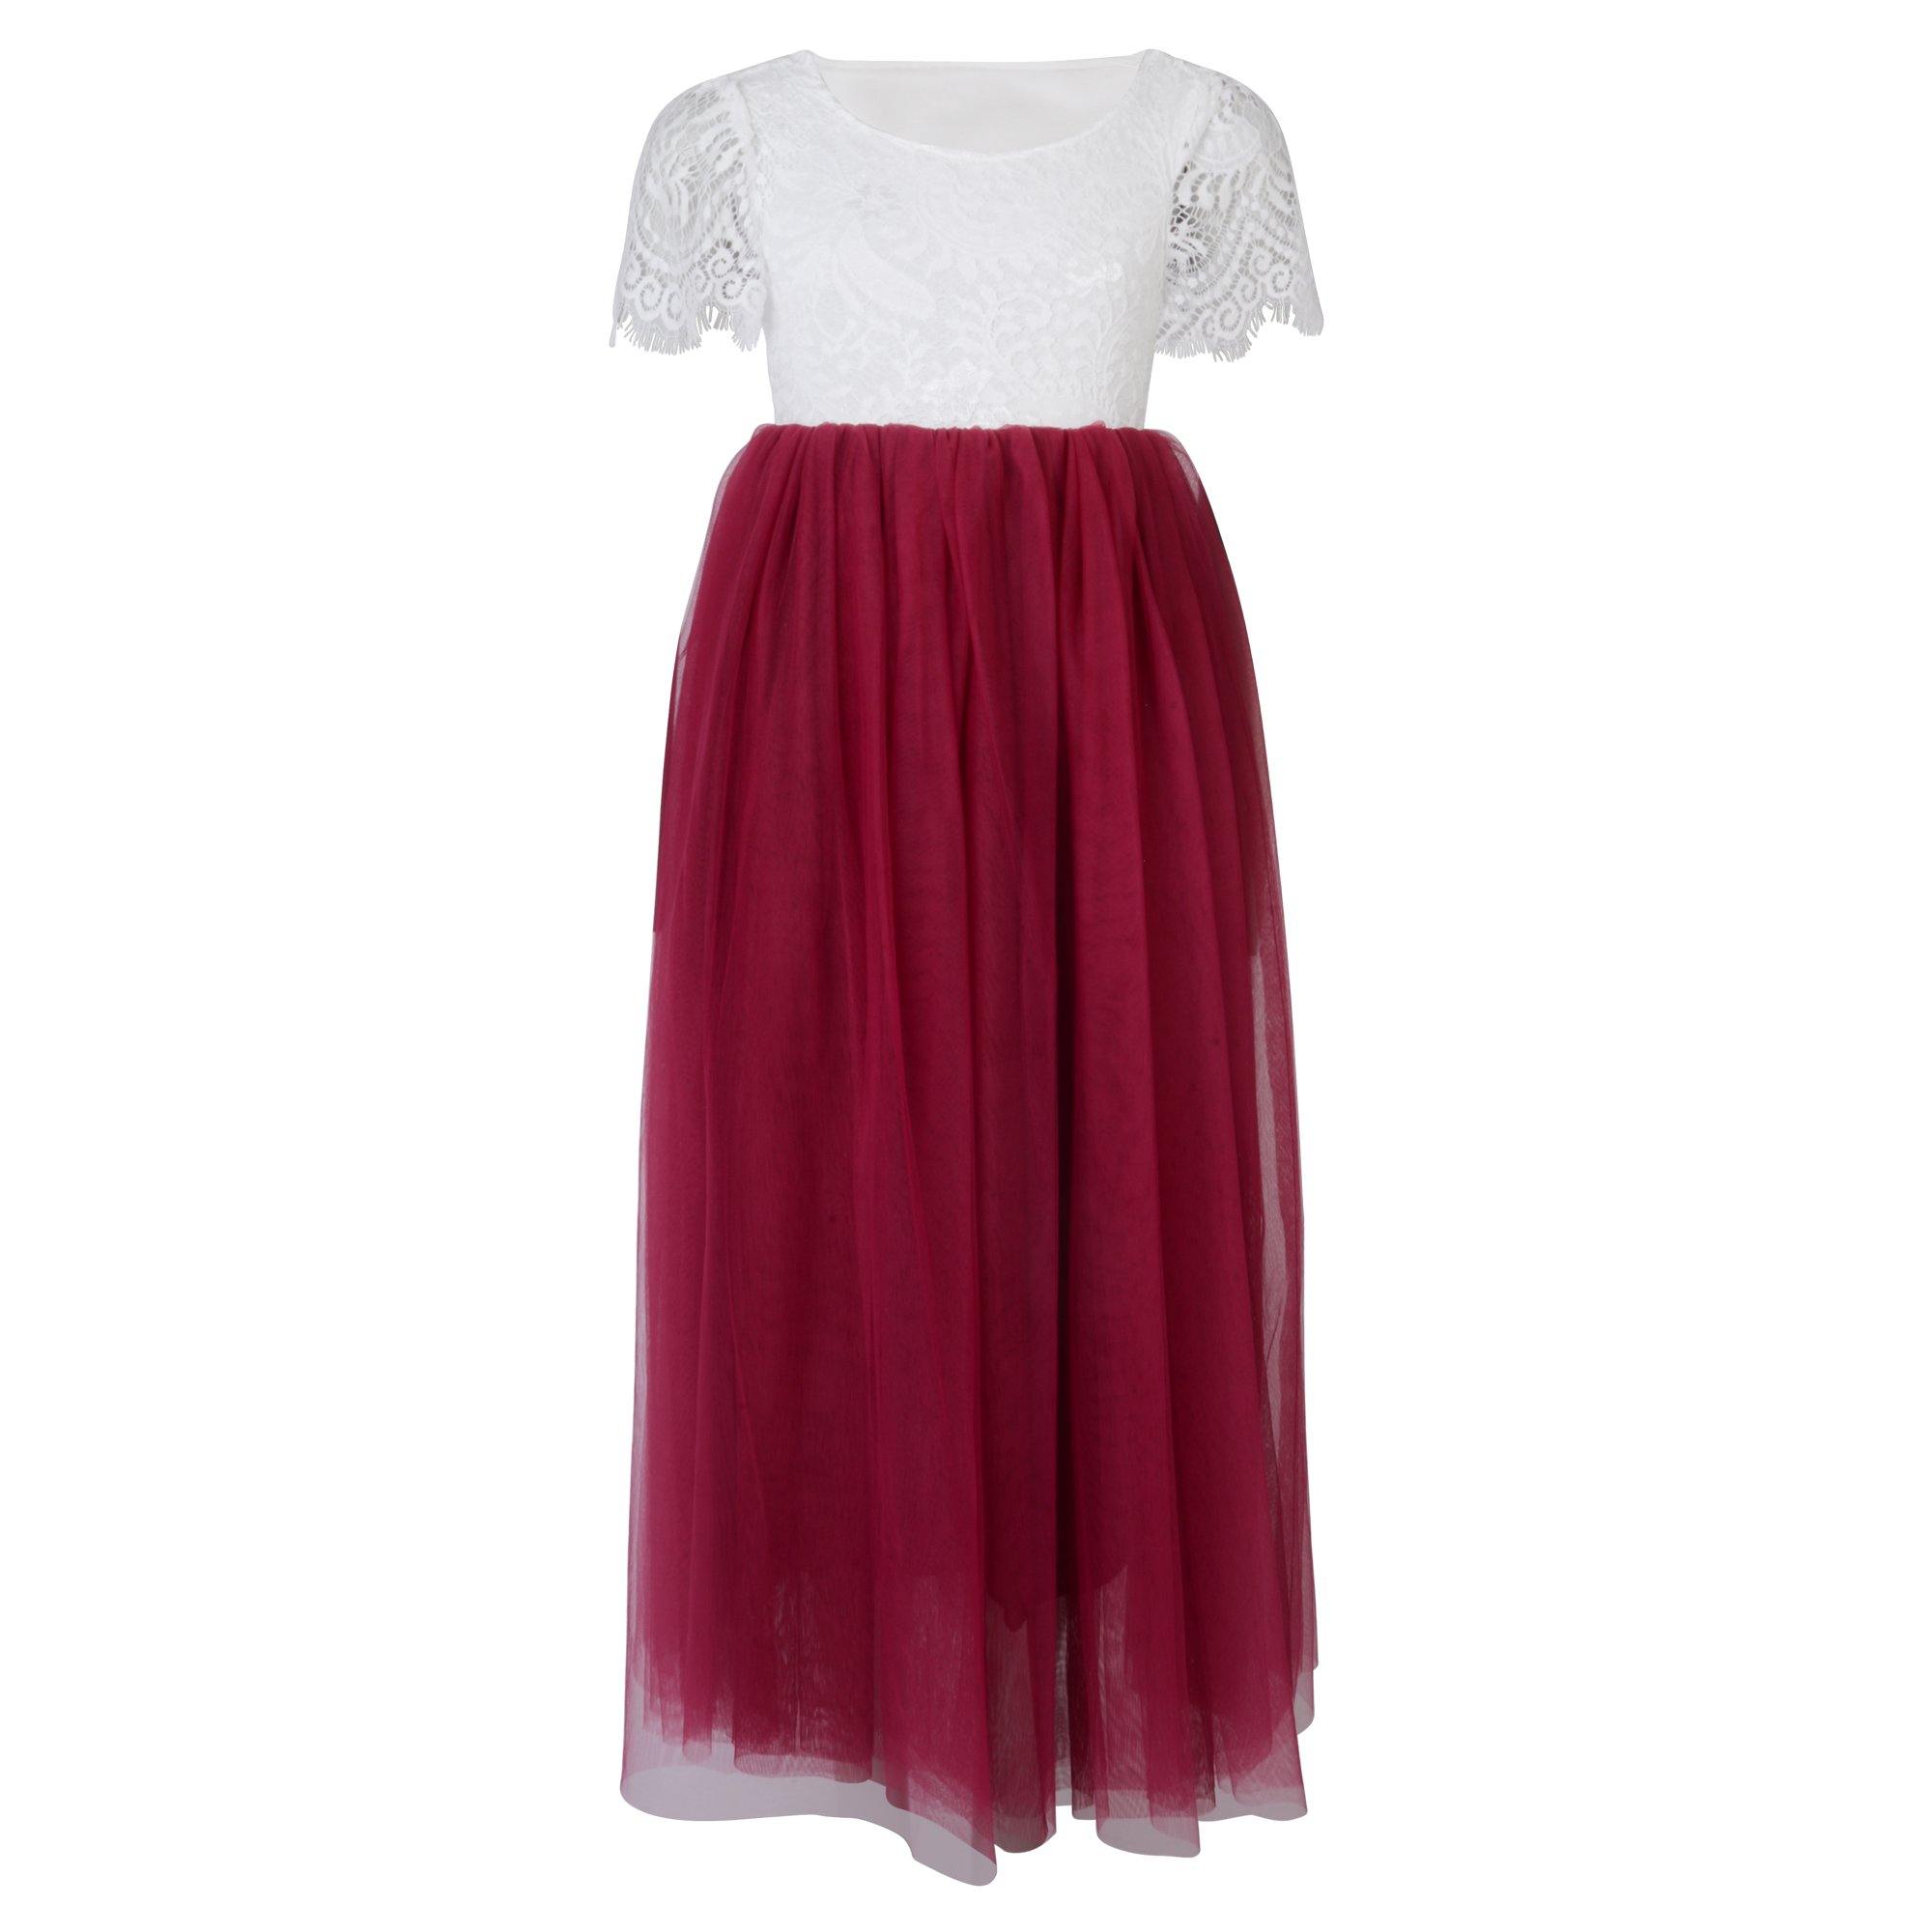 Red Velvet Flower Maroon Gown For Debut For Girls Perfect For Weddings,  Parties, And Birthdays From Foreverbridal, $91.25 | DHgate.Com